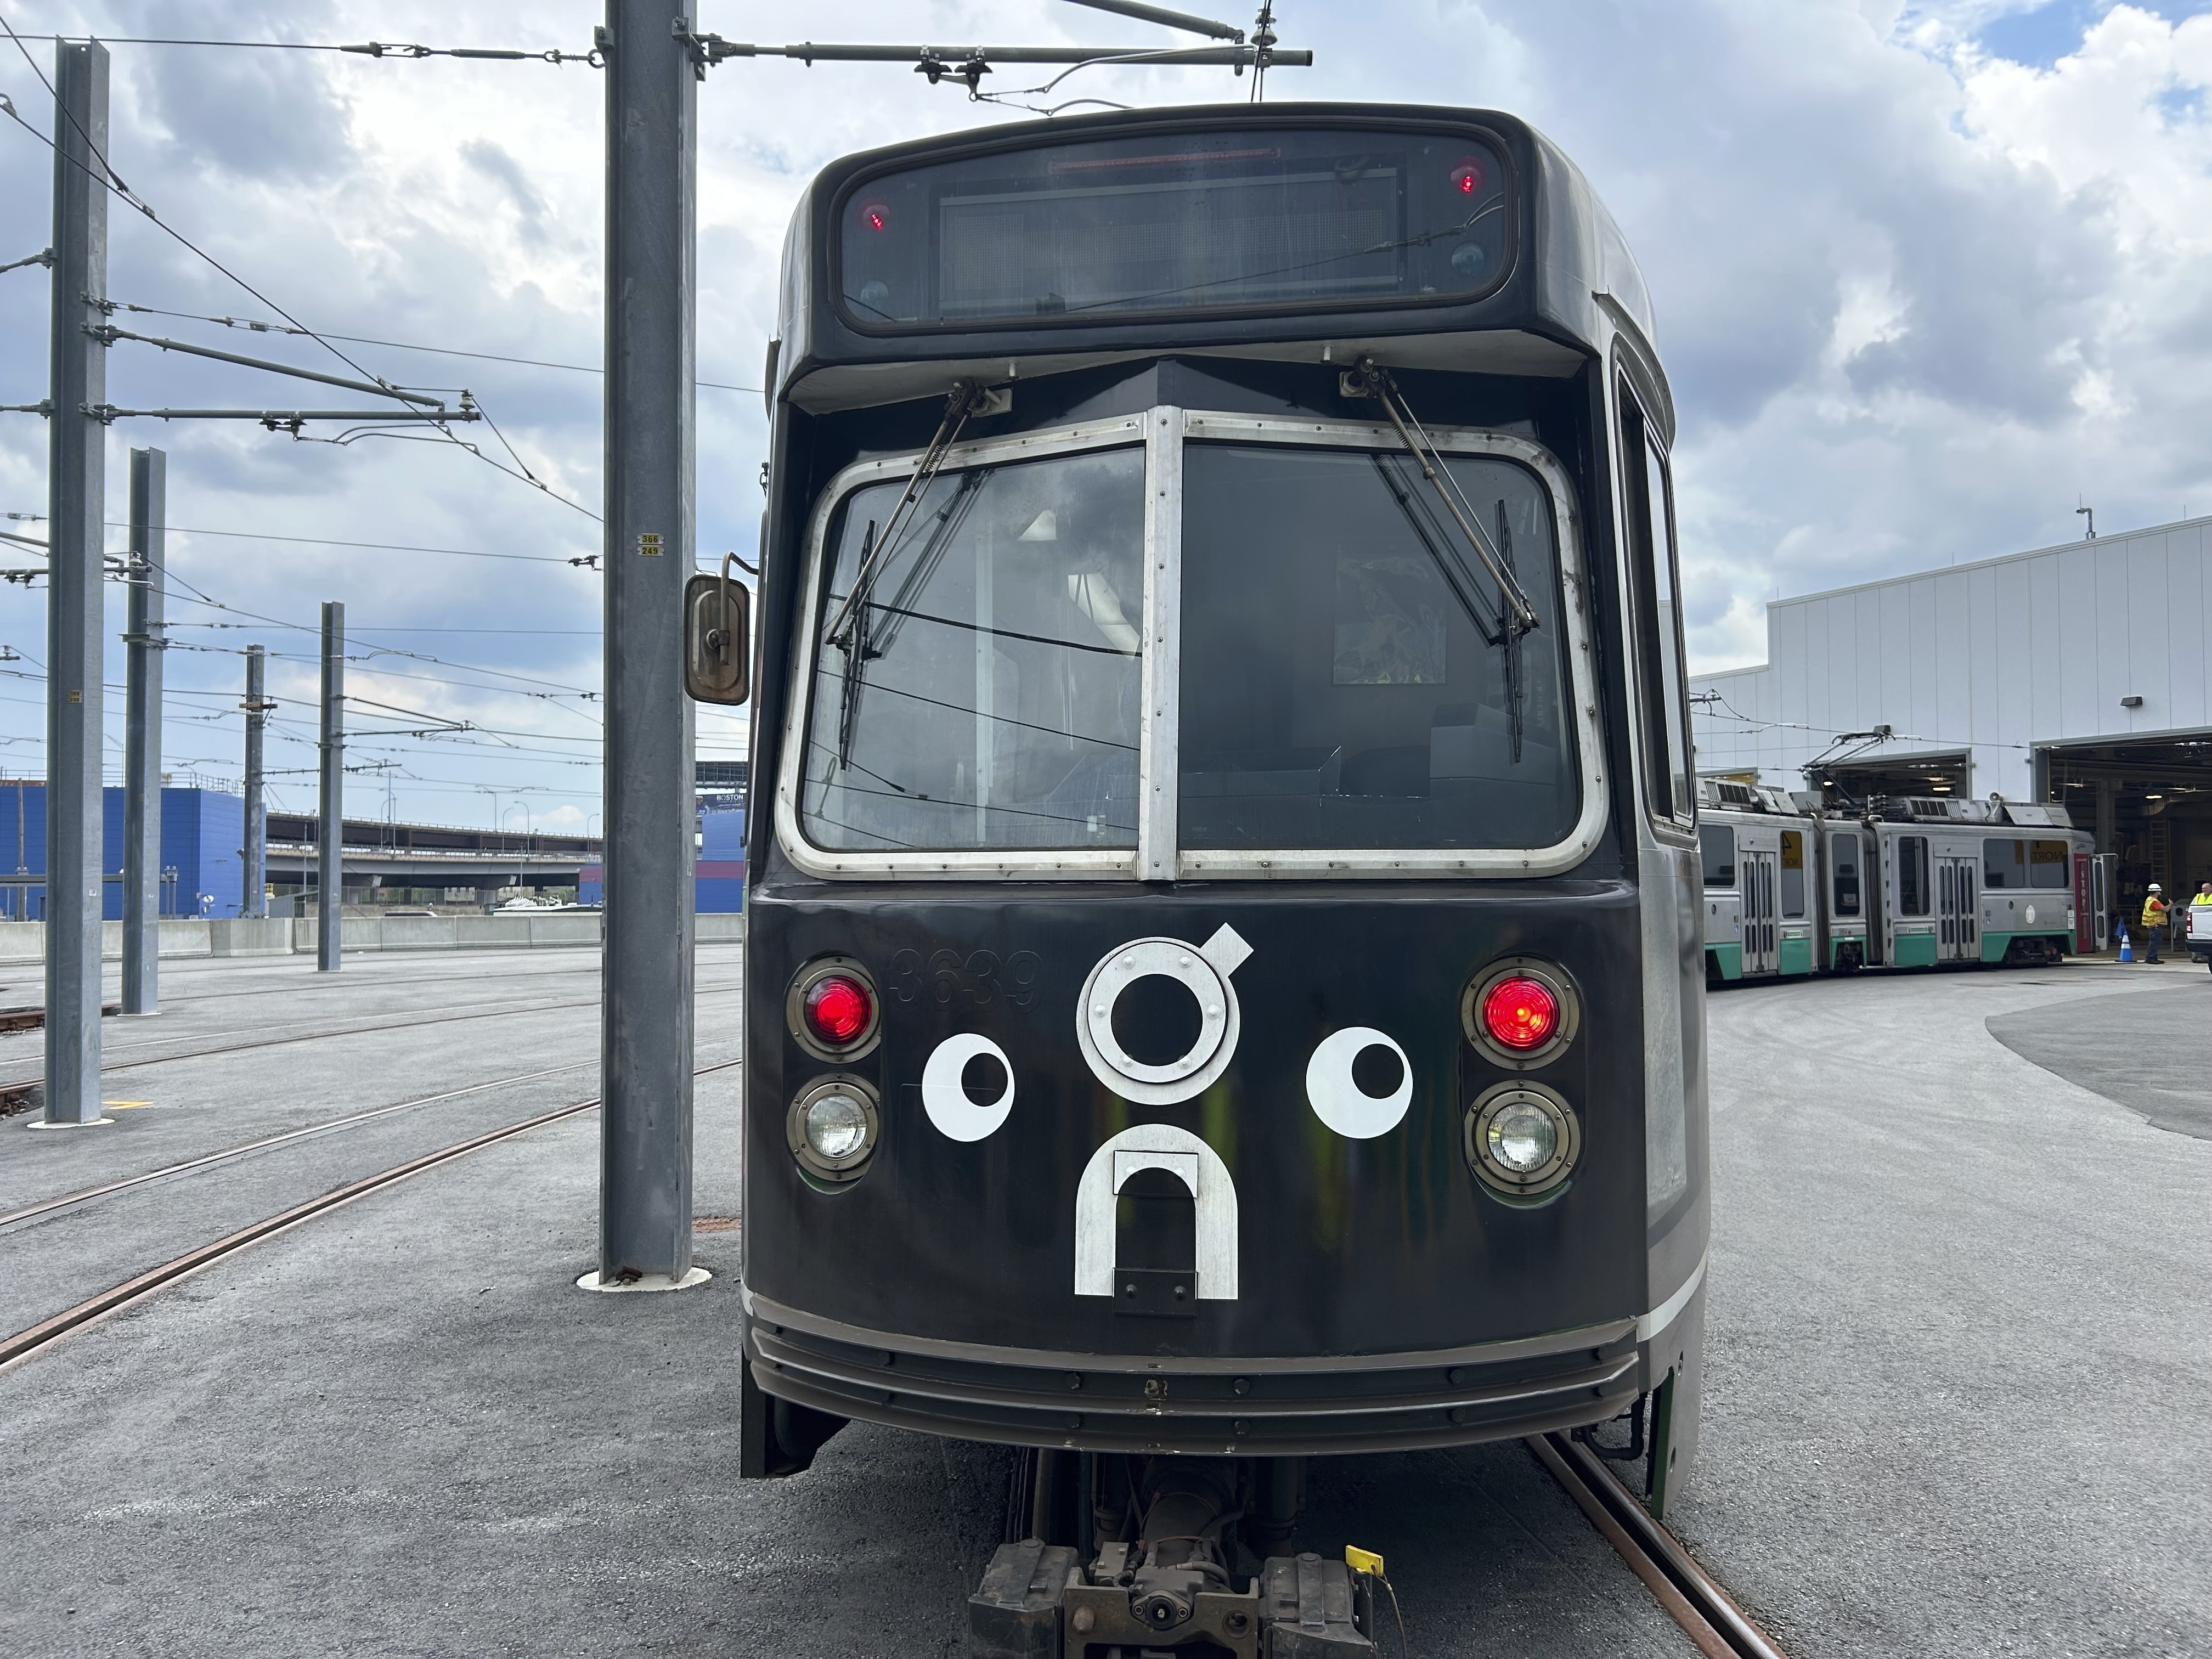 In this undated photo released by the Massachusetts Bay Transportation Authority, MBTA, a subway car dons googly eyes under its front windshield in Boston. (Massachusetts Bay Transportation Authority via AP)